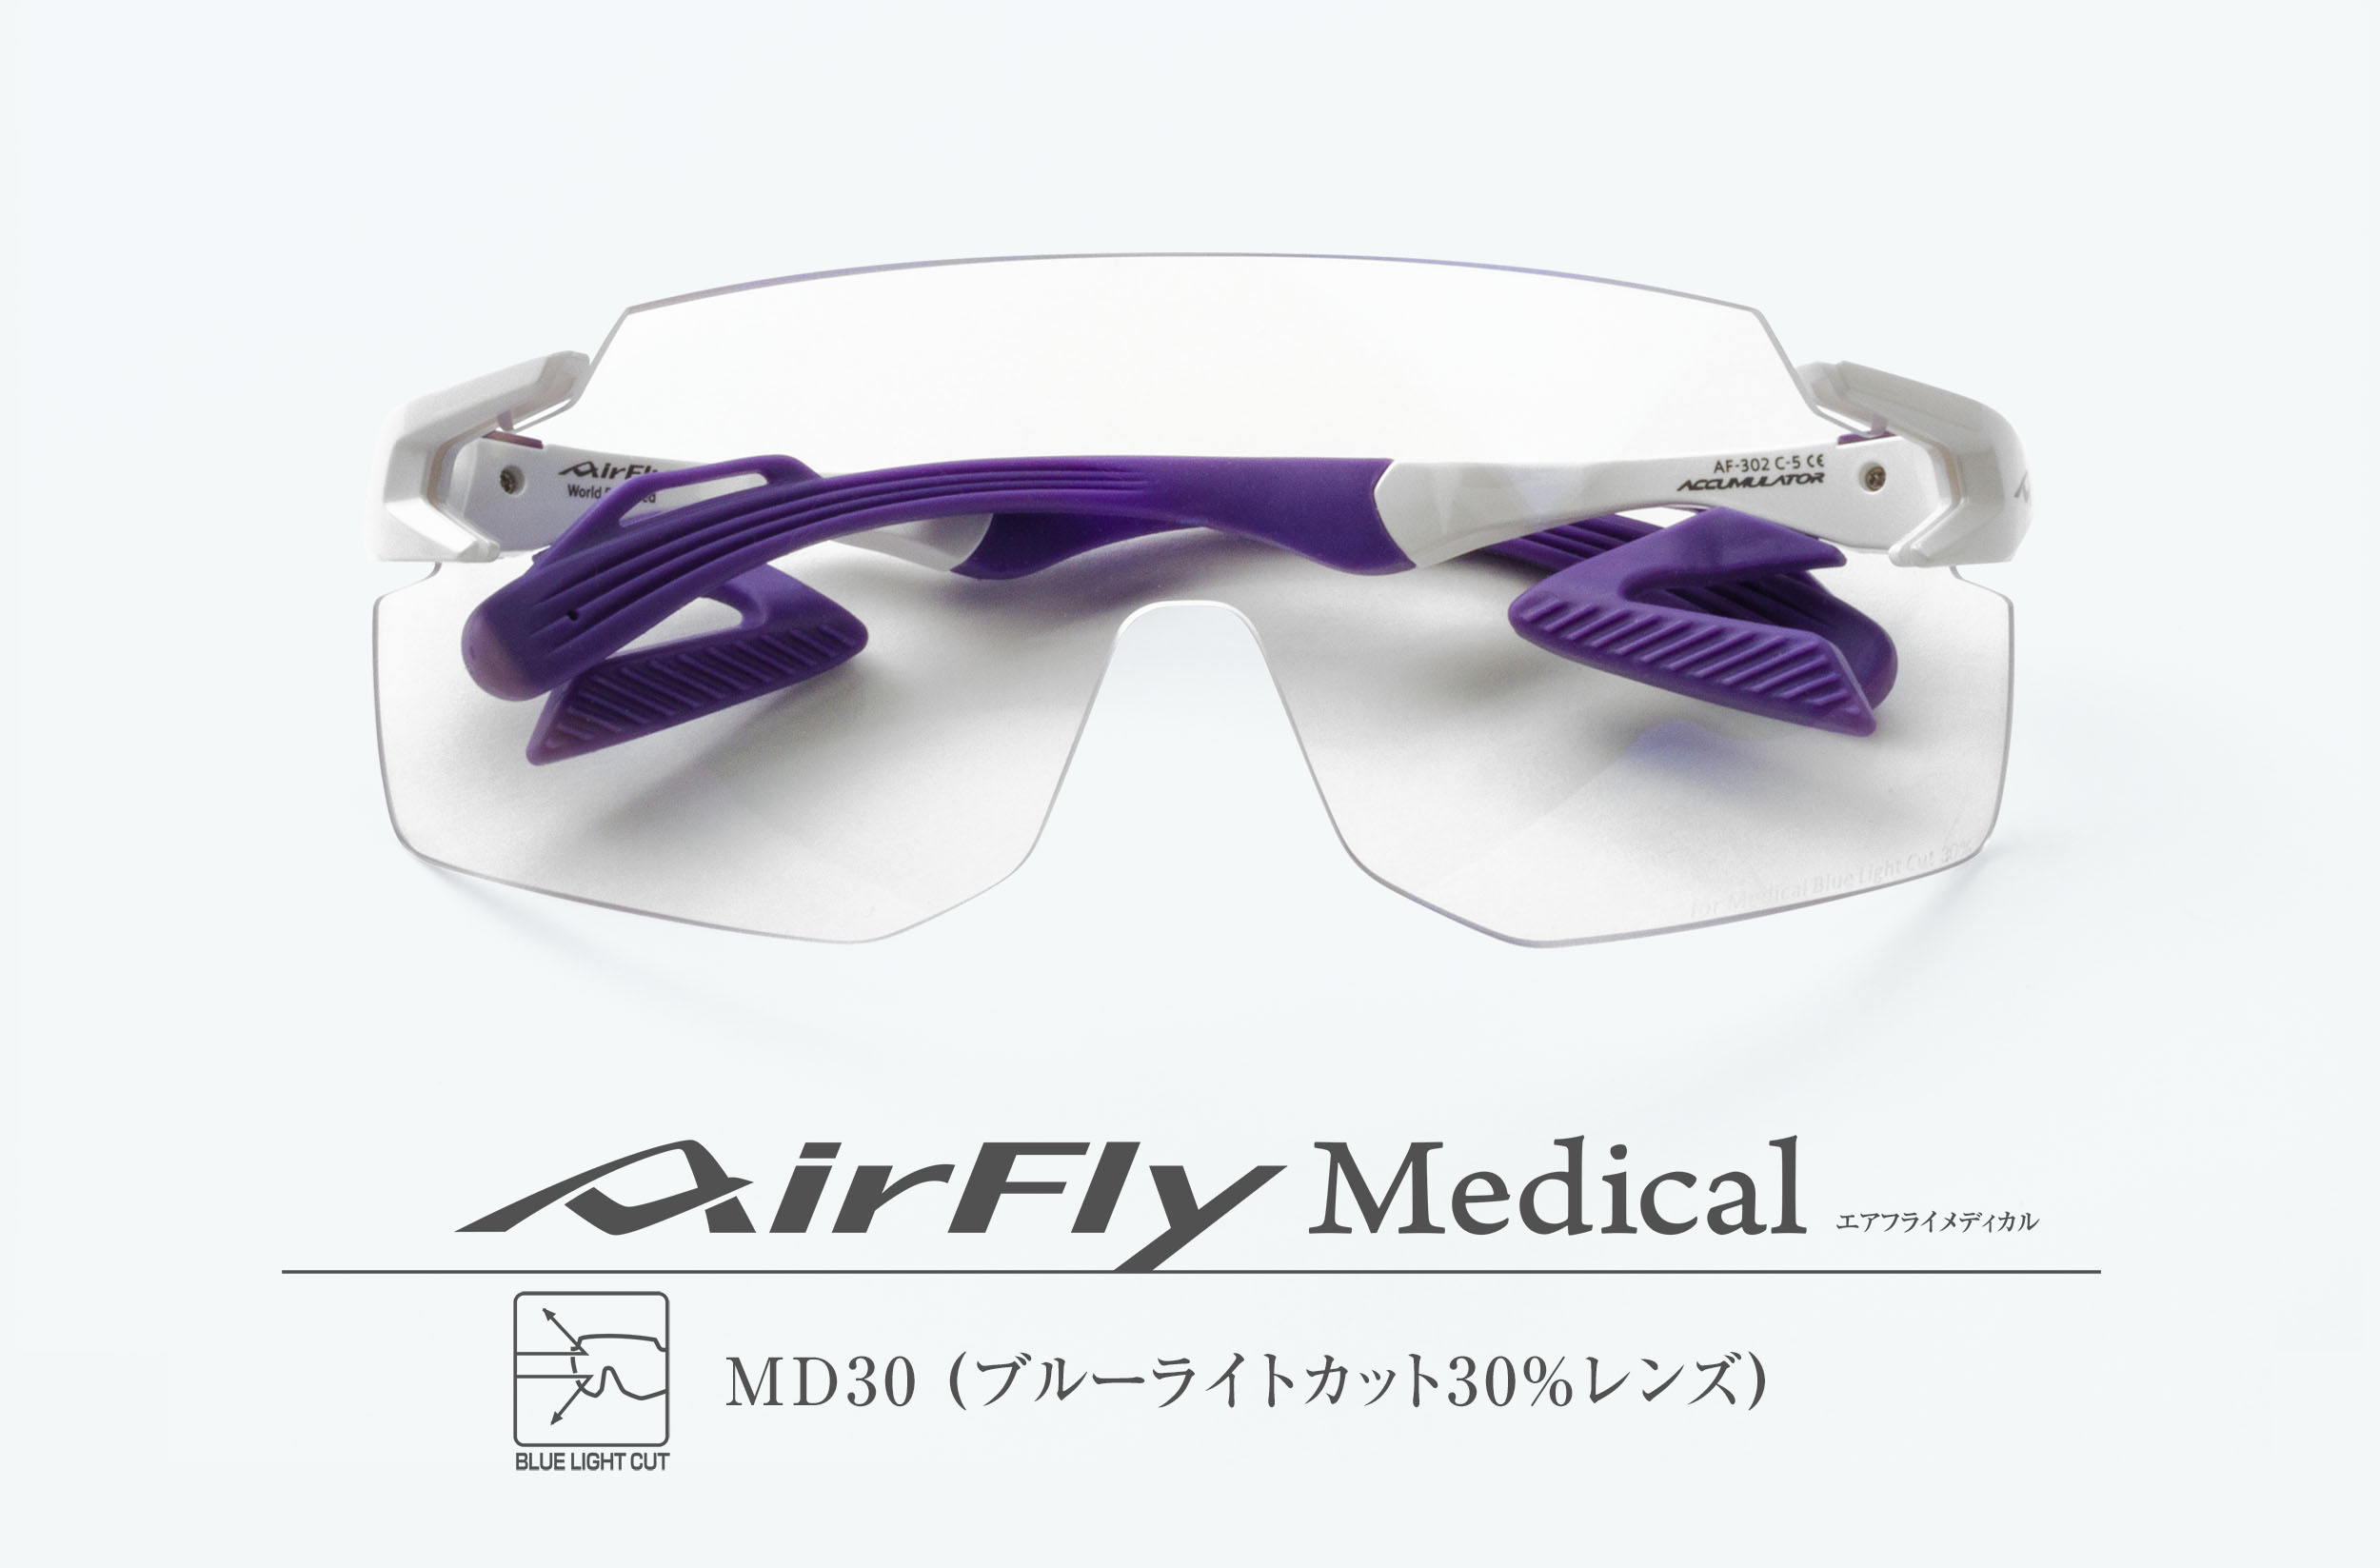 AirFly Medical MD30 series